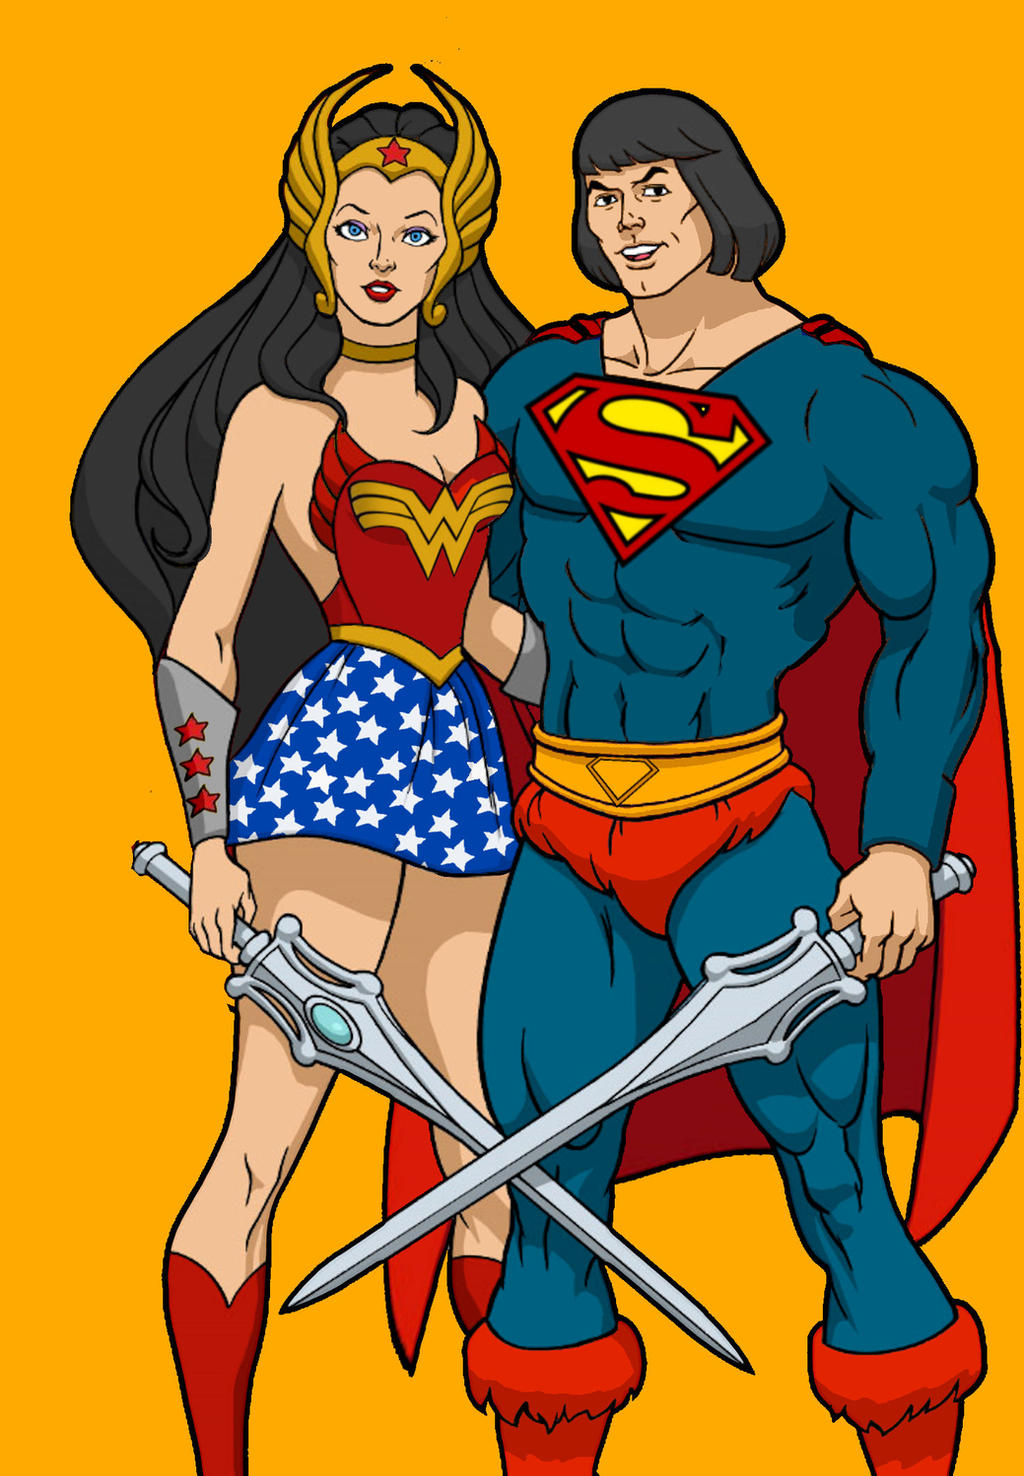 divers travaux  reparations maj 30 avril fin du  ptit groot en page 4 - Page 3 She_ra_and_he_man_as_wonder_woman_and_superman_by_brandtk-d9j7r4i